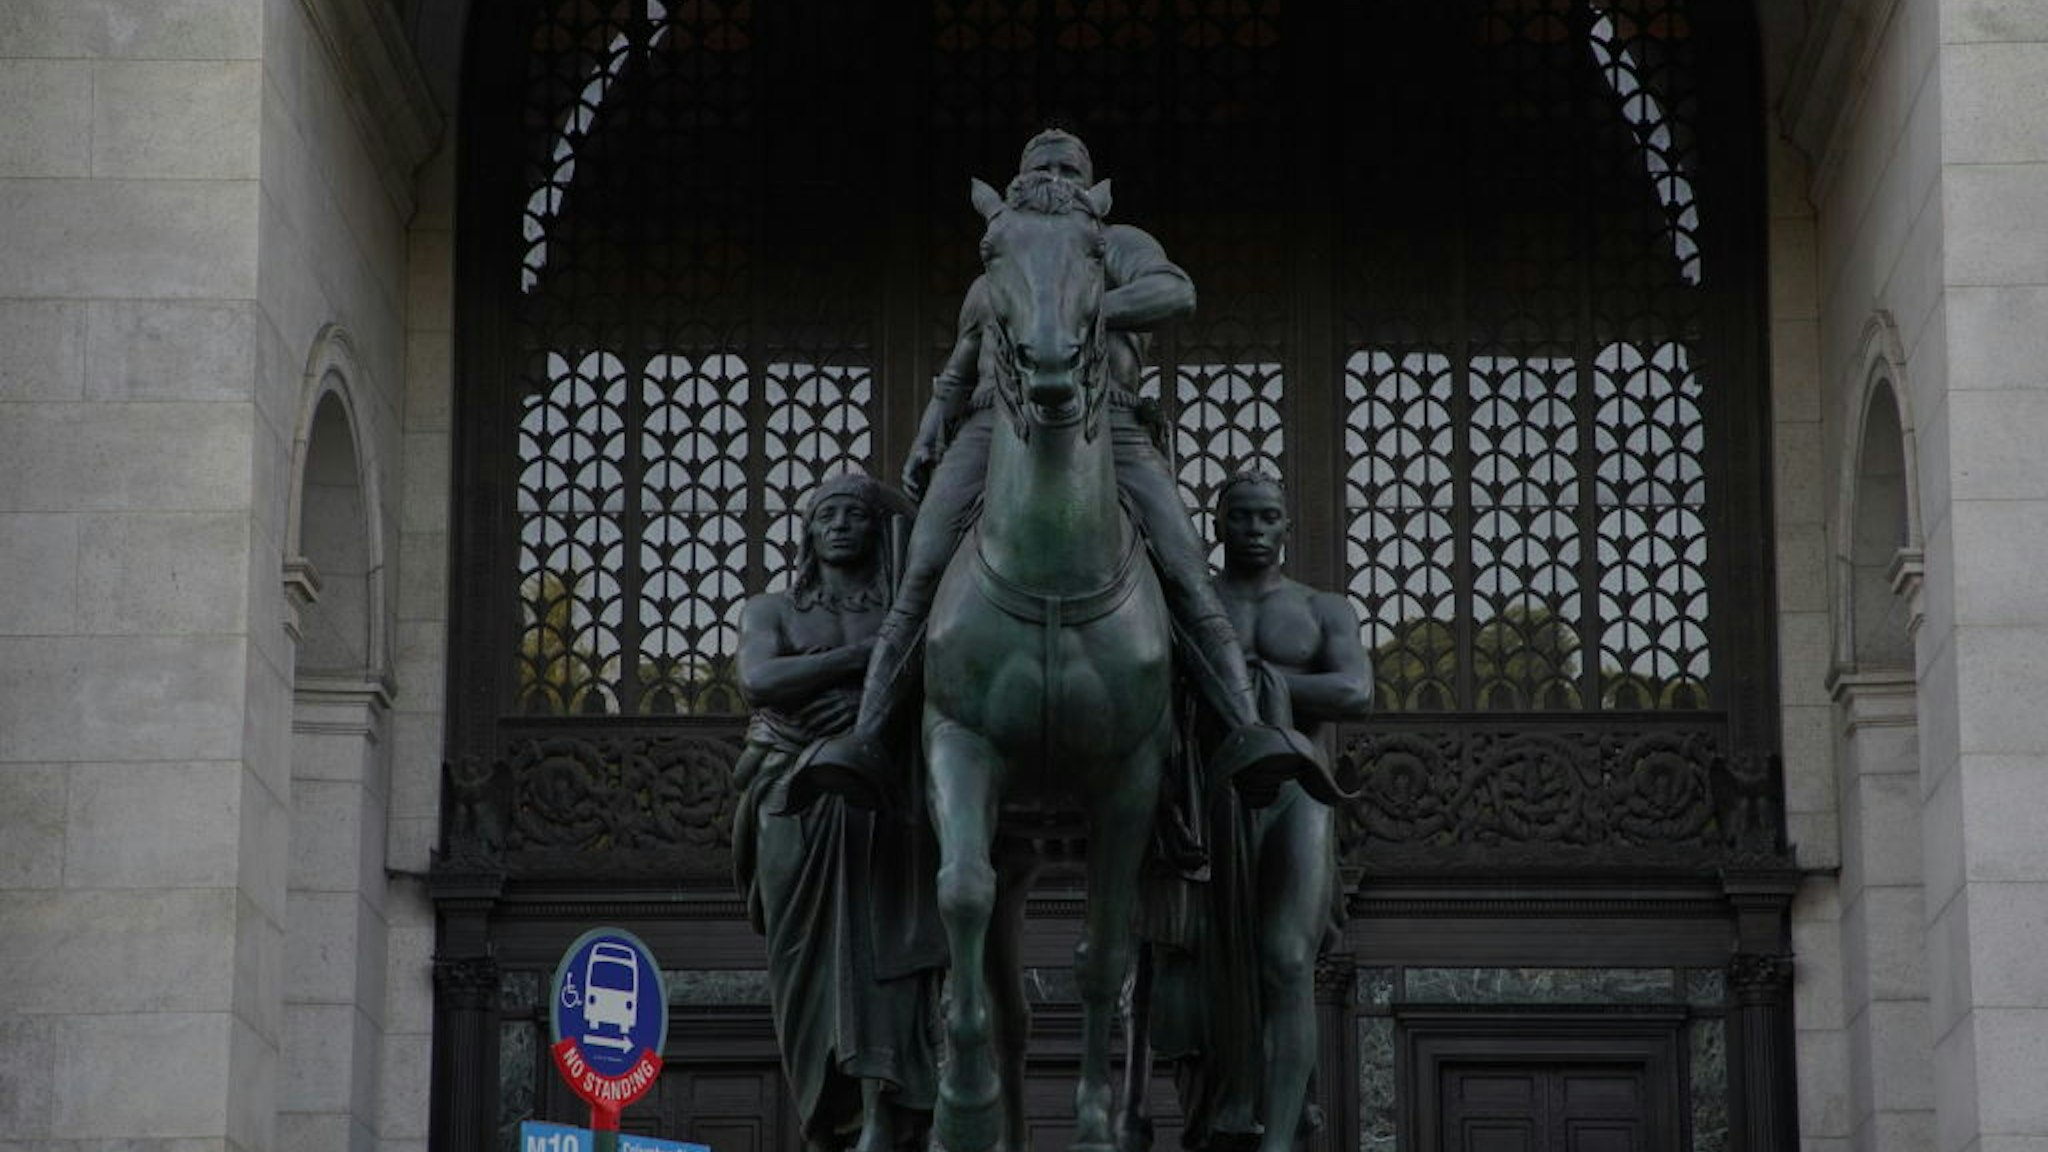 NEW YORK, NEW YORK - JUNE 16: A view of the Equestrian Statue of Theodore Roosevelt at American Museum of Natural History on June 16, 2020 in New York City. The killing of George Floyd by a police officer in Minneapolis has brought a heightened awareness to racial justice across America, and many have long called for taking down statues of Confederate generals and others who helped perpetuate racial injustice. (Photo by Rob Kim/Getty Images)